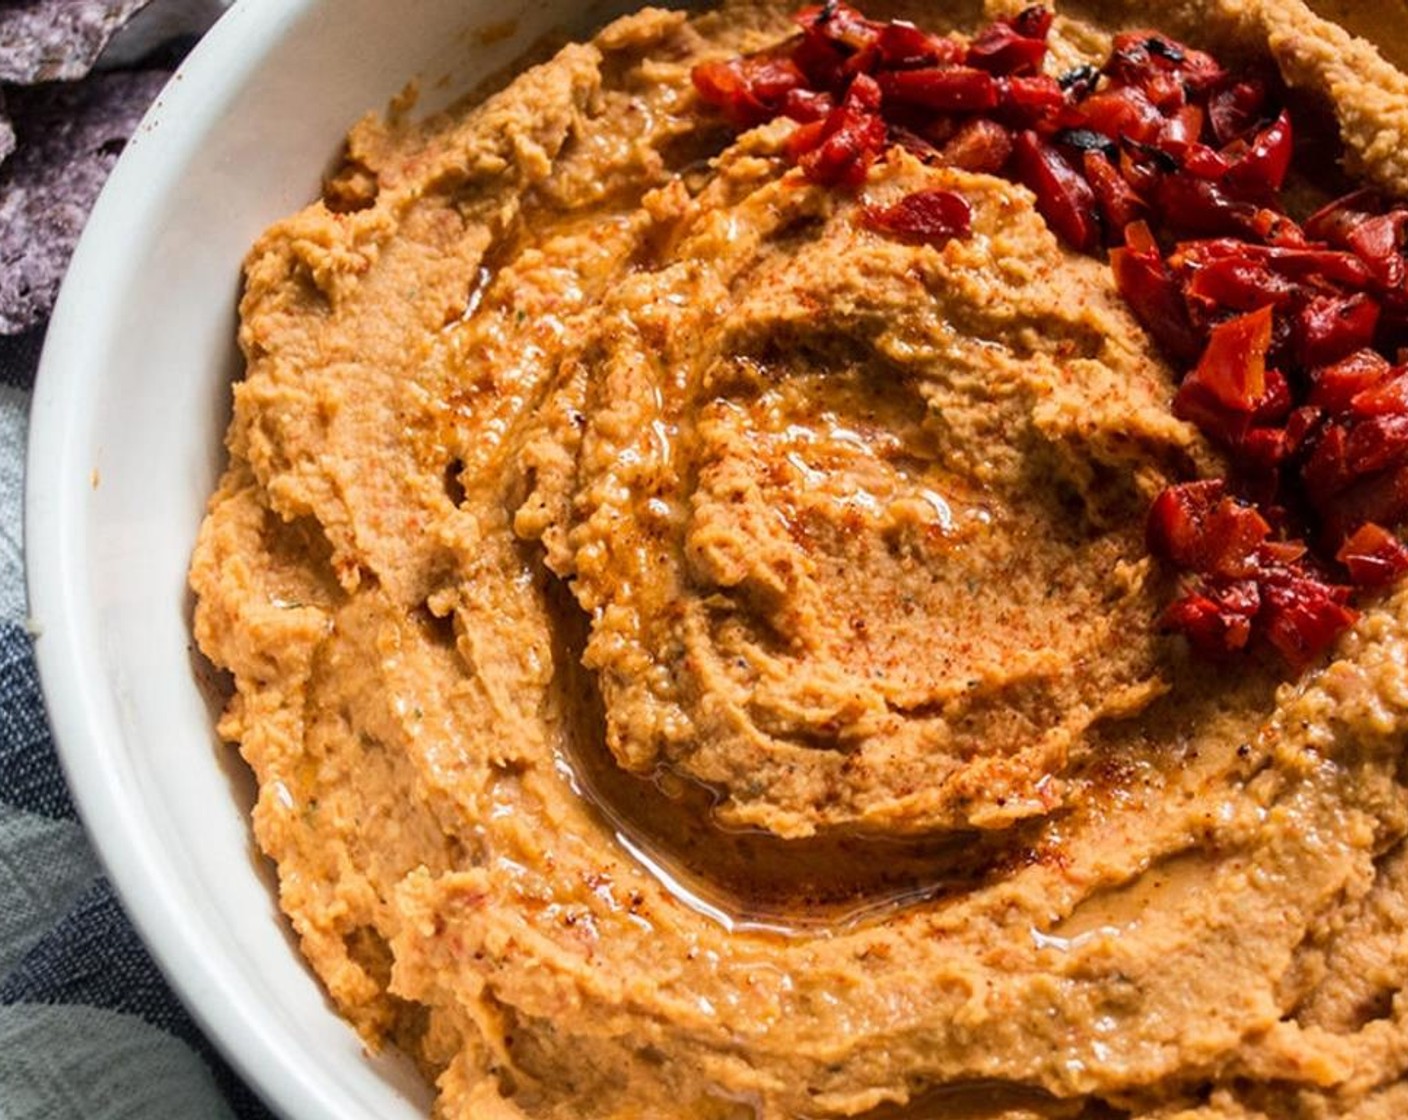 step 7 Transfer hummus to a small serving bowl and drizzle with Roasted Walnut Oil (2 Tbsp). Take the reserved roasted red peppers and chop finely, then use as garnish, along with a light sprinkle of Smoked Paprika (to taste).